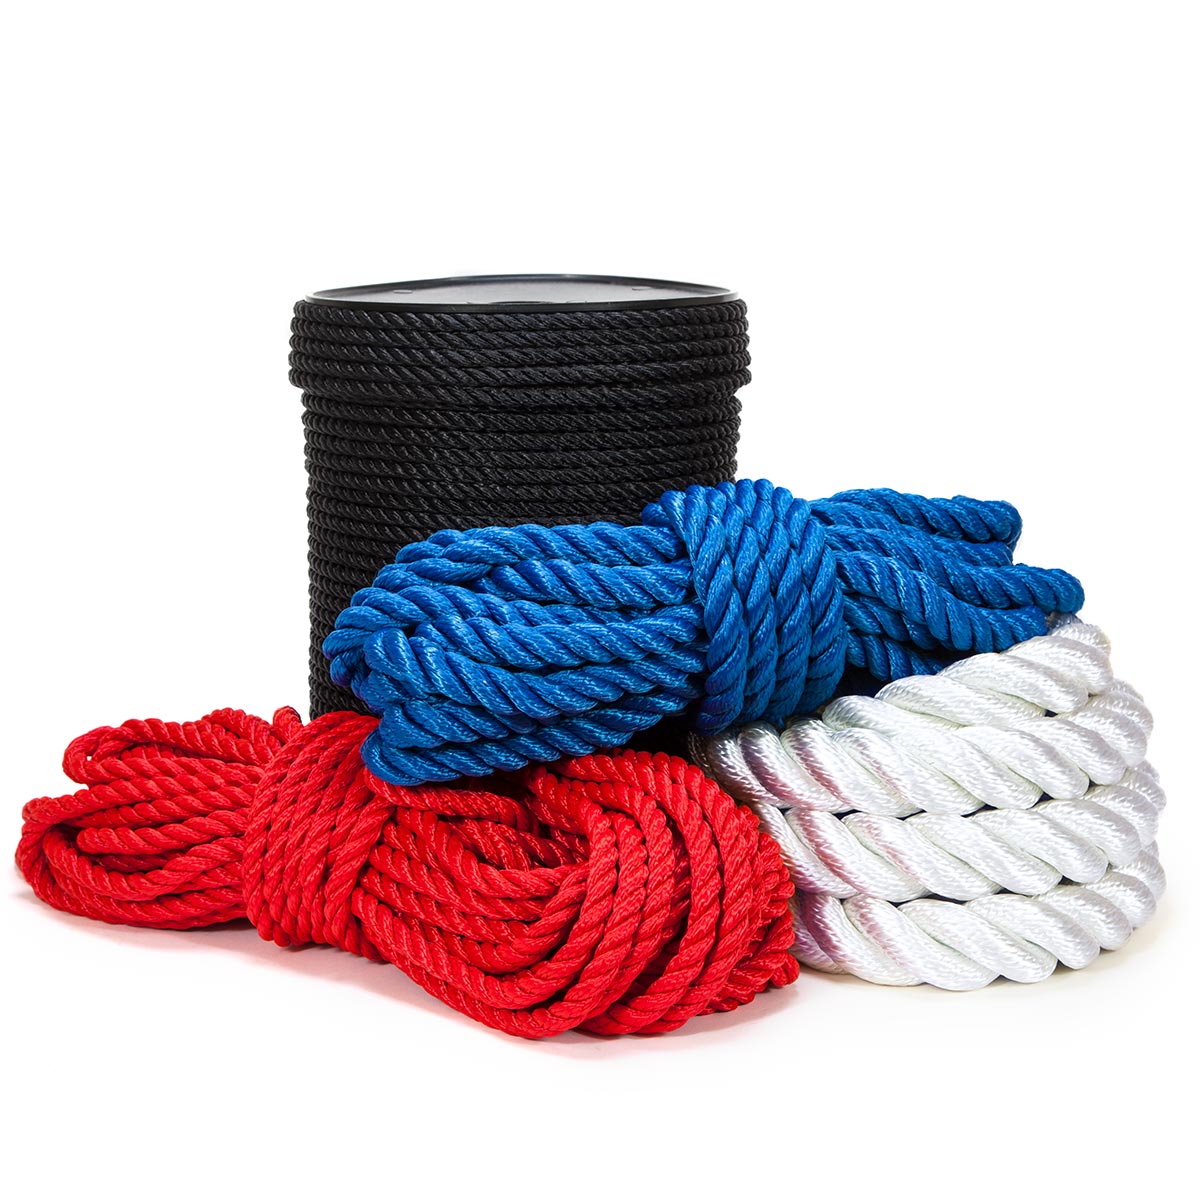 Casewin 1 Pack Soft Nylon Rope, Multipurpose Durable Long Rope Craft Rope,  65.6 Feet/20M Soft Twisted Nylon Knot Tying Rope Cord, Utility Braided Rope